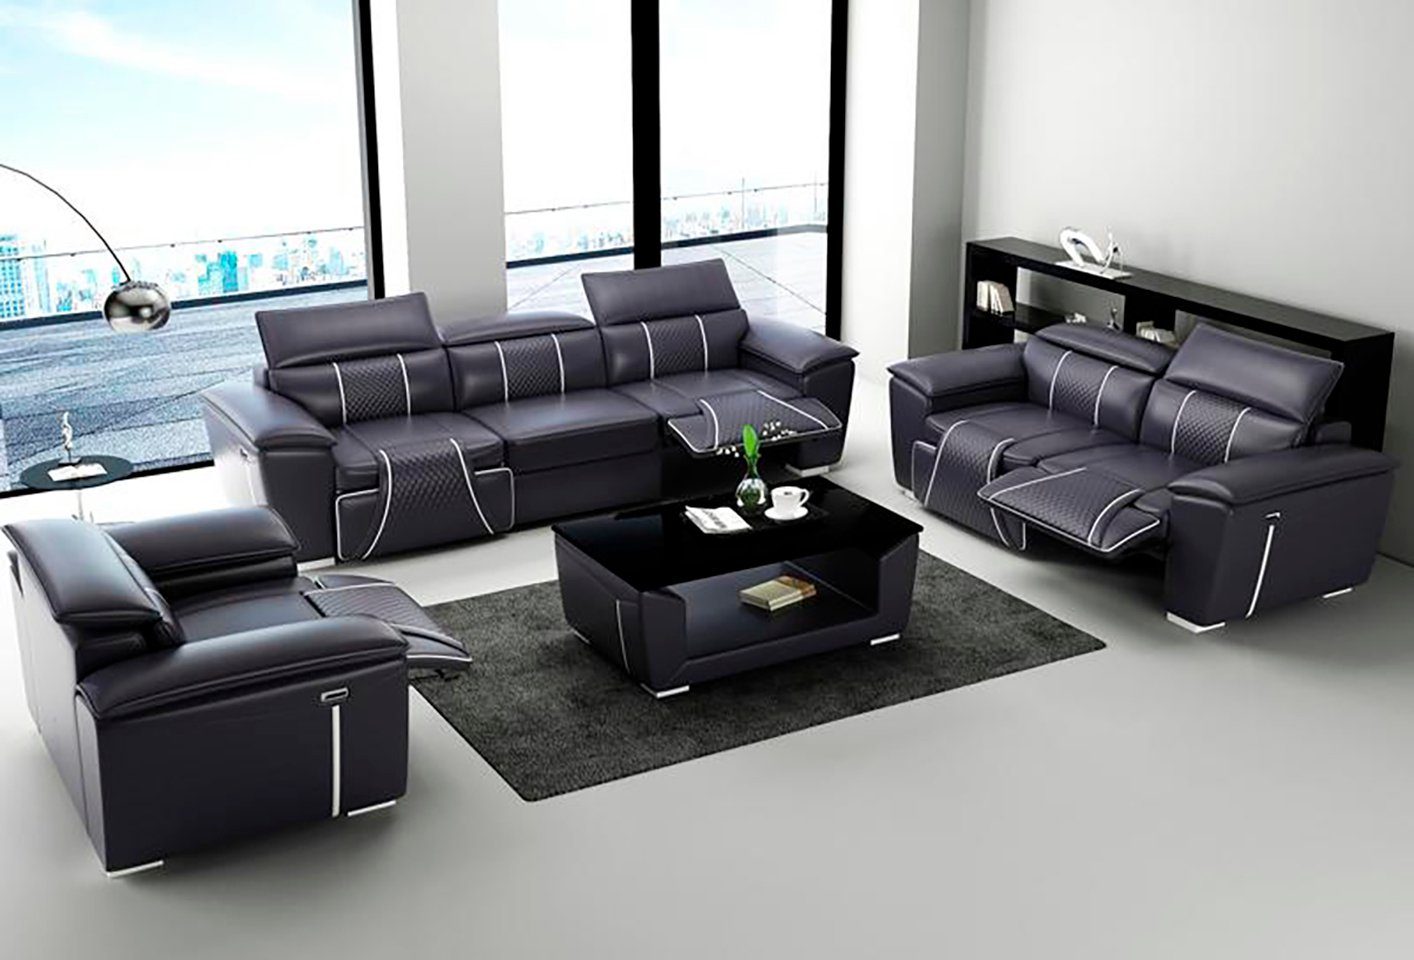 JVmoebel Sofa Multifunktions Couch Relax Sofagarnitur Polster Sofa 3+2+2 Sitzer, Made in Europe | Alle Sofas